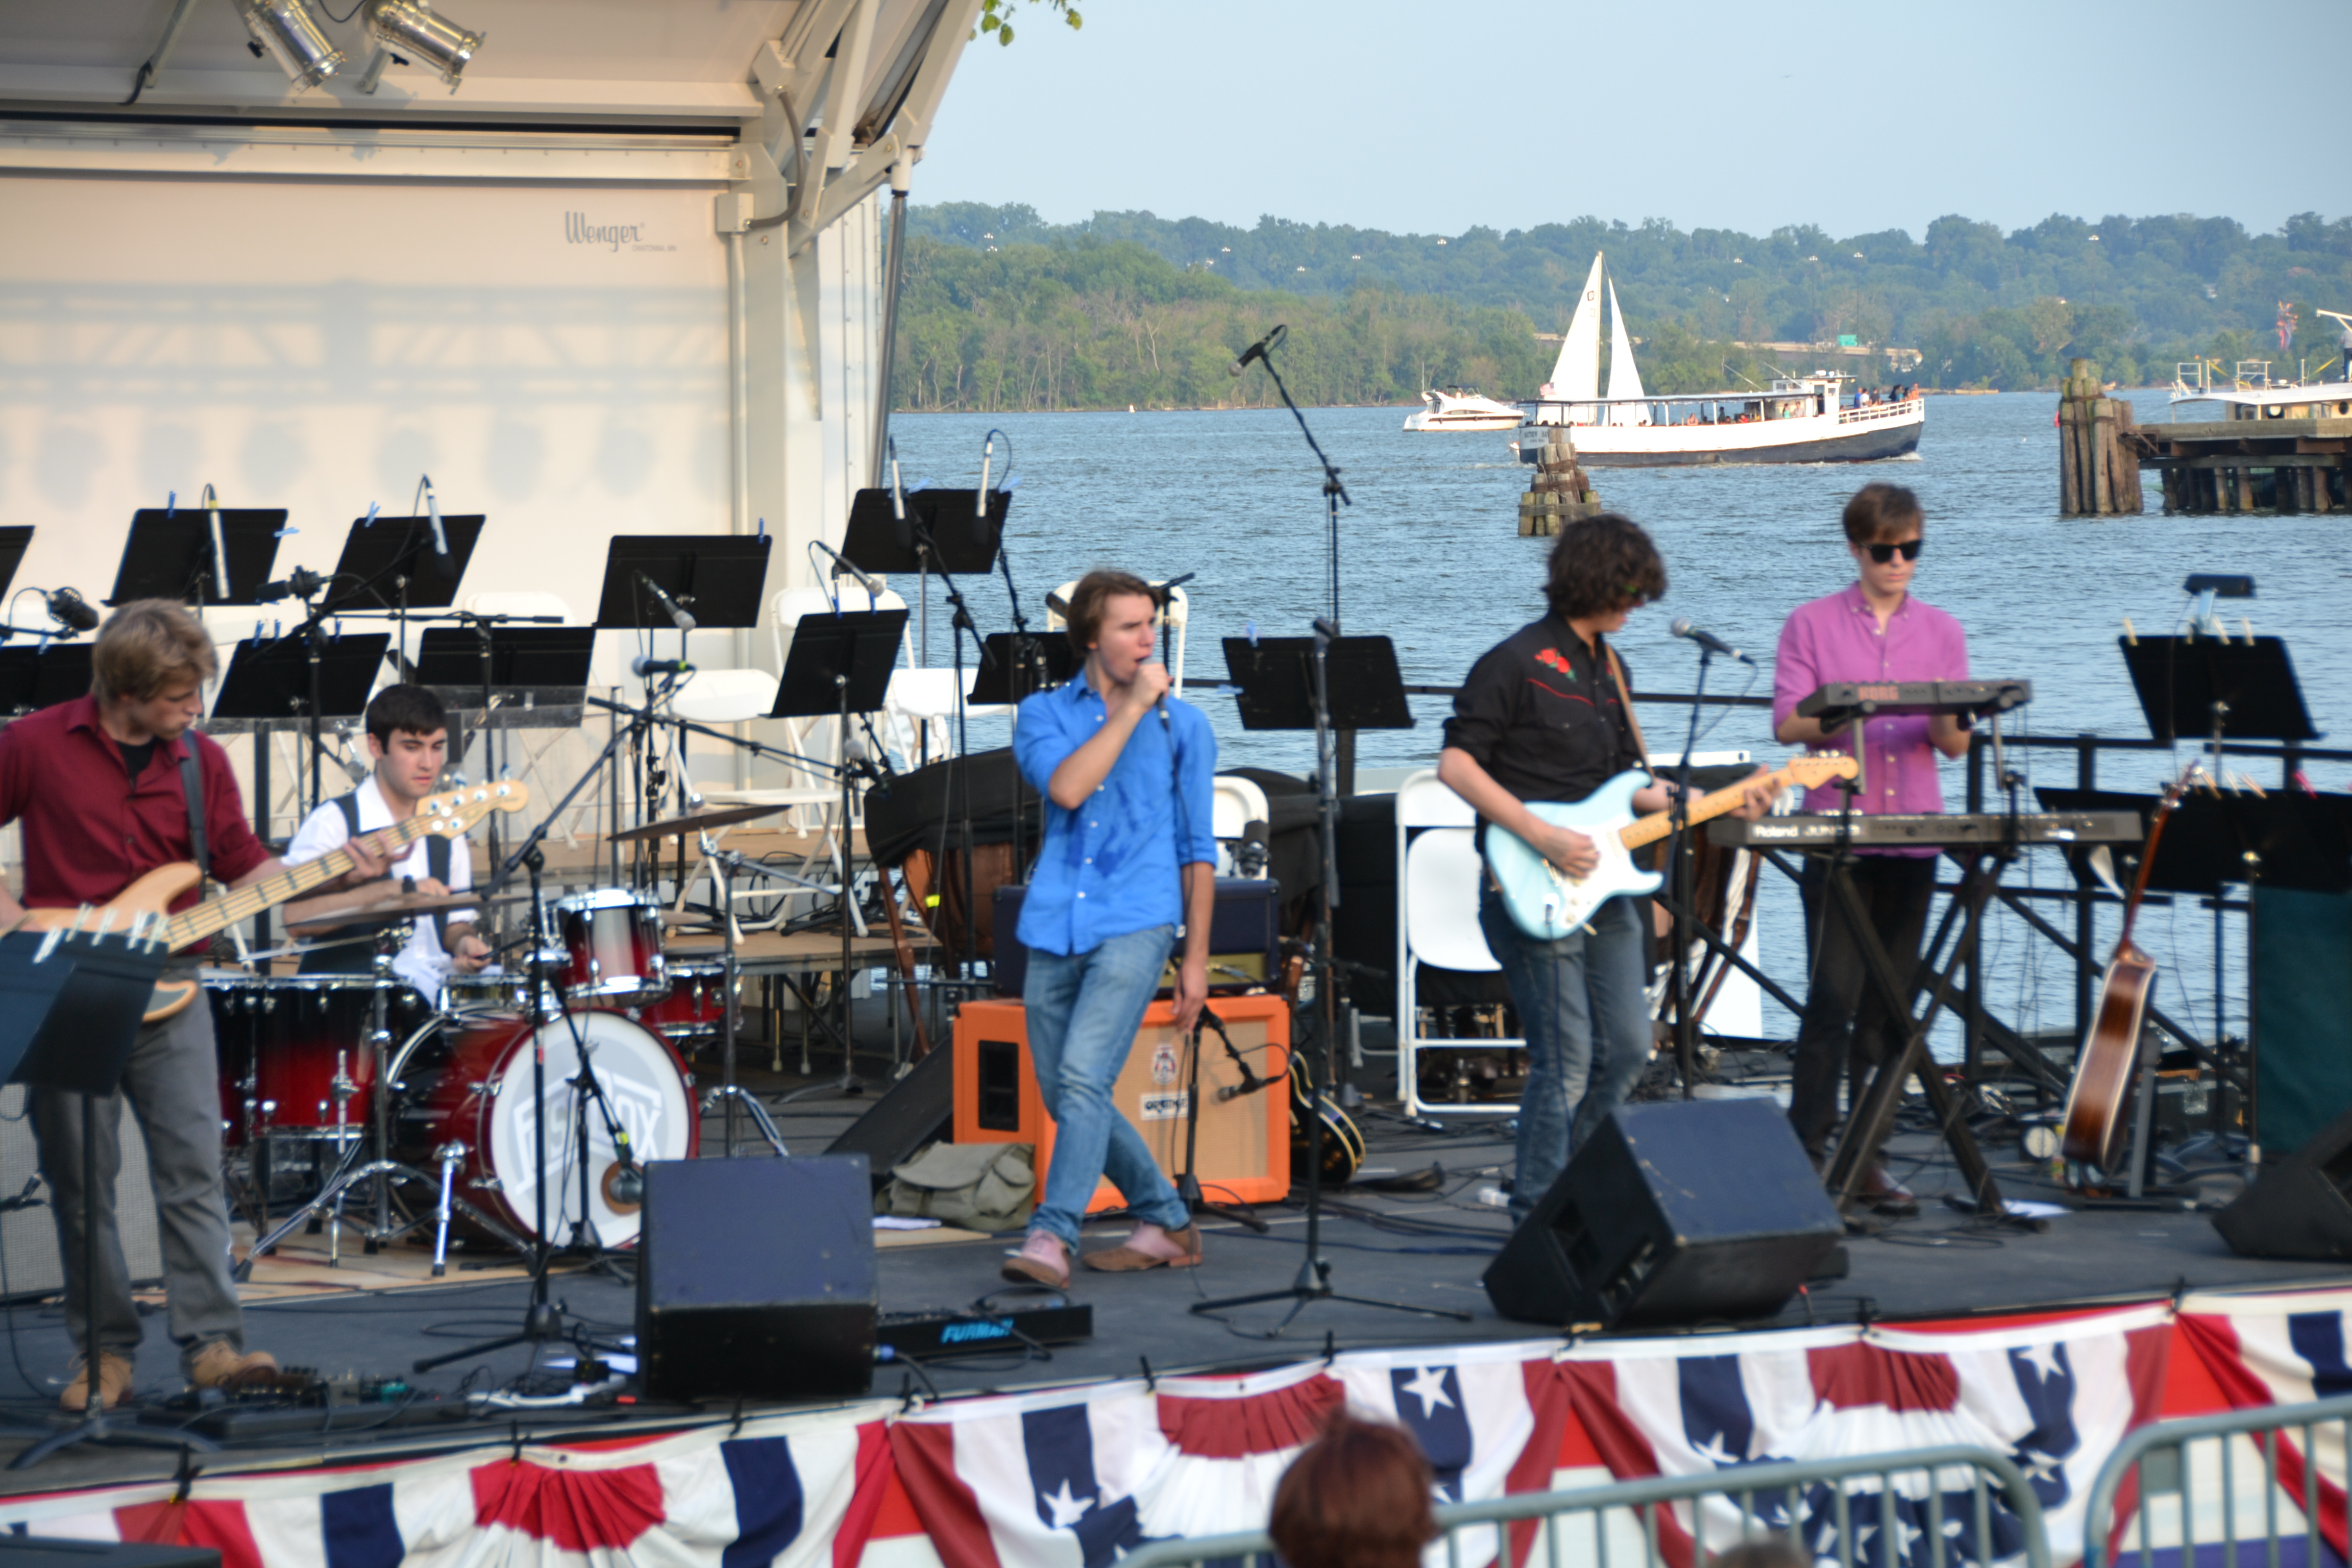 Fuse Box Band and lead singer Kent Jenkins perform at Alexandria's 2014 Birthday Celebration on the Potomac River